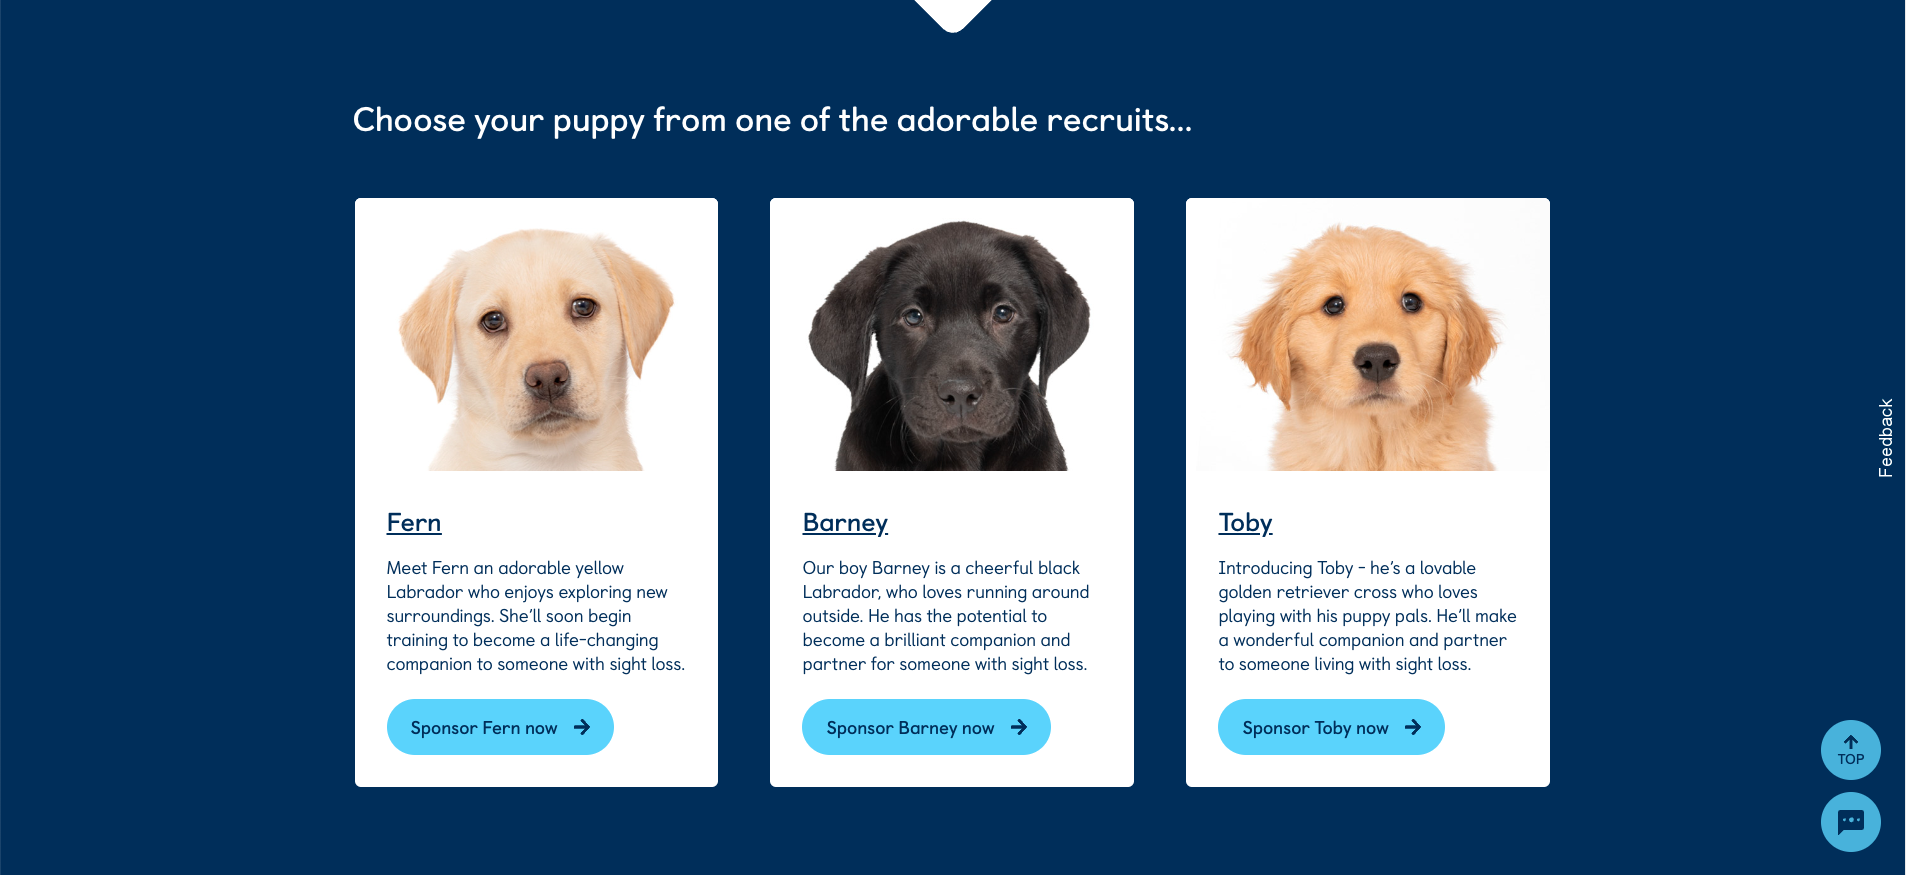 Screenshot from the Guide Dogs charity website showing 3 puppies, or 'new recruits'.